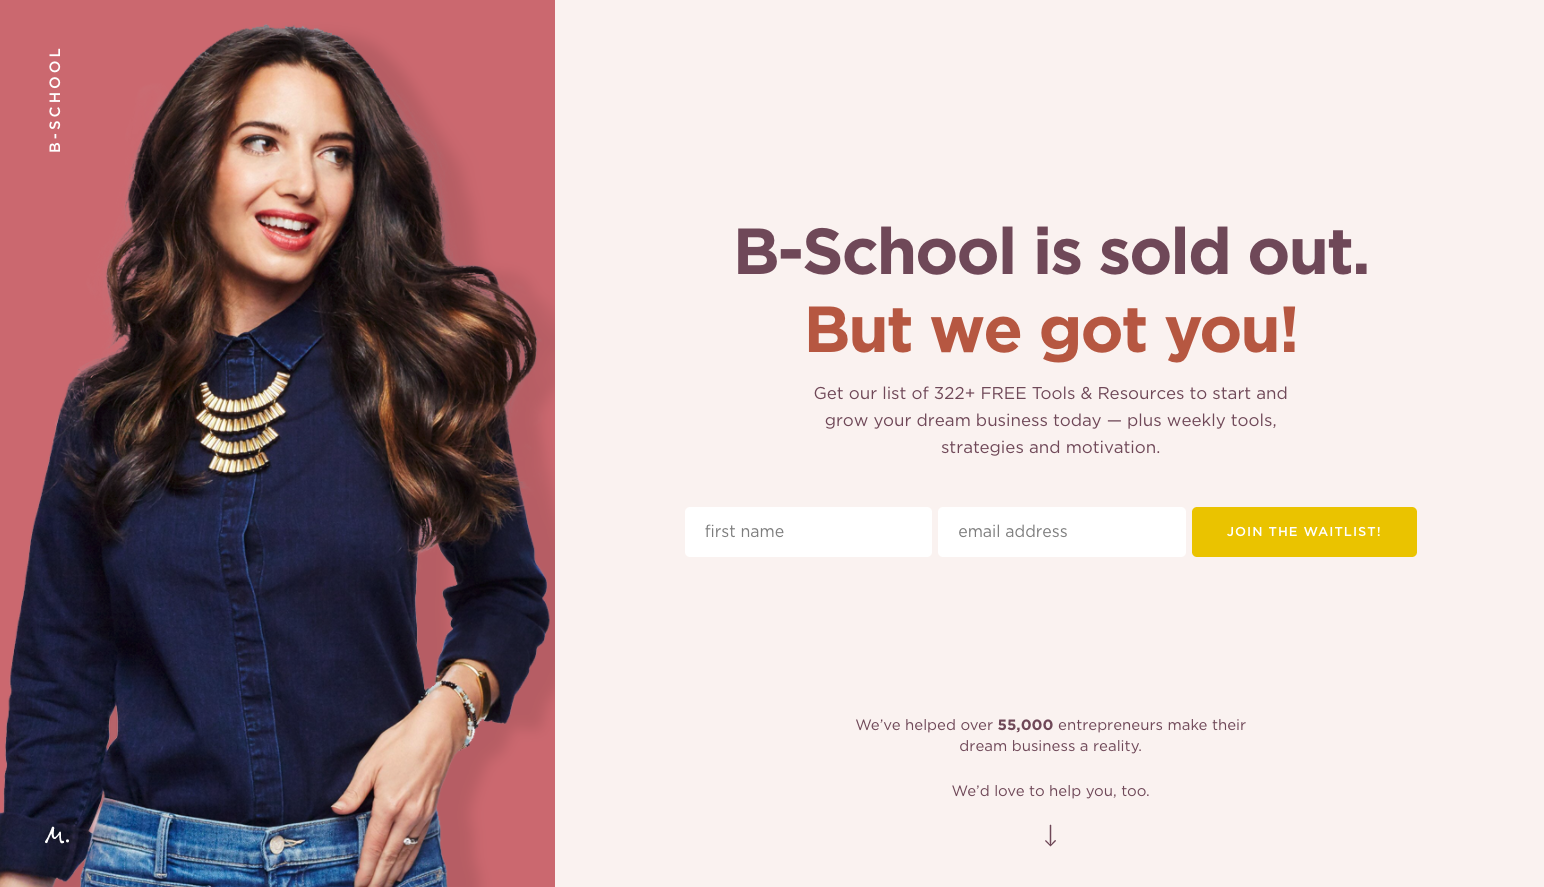 B-School info product page.